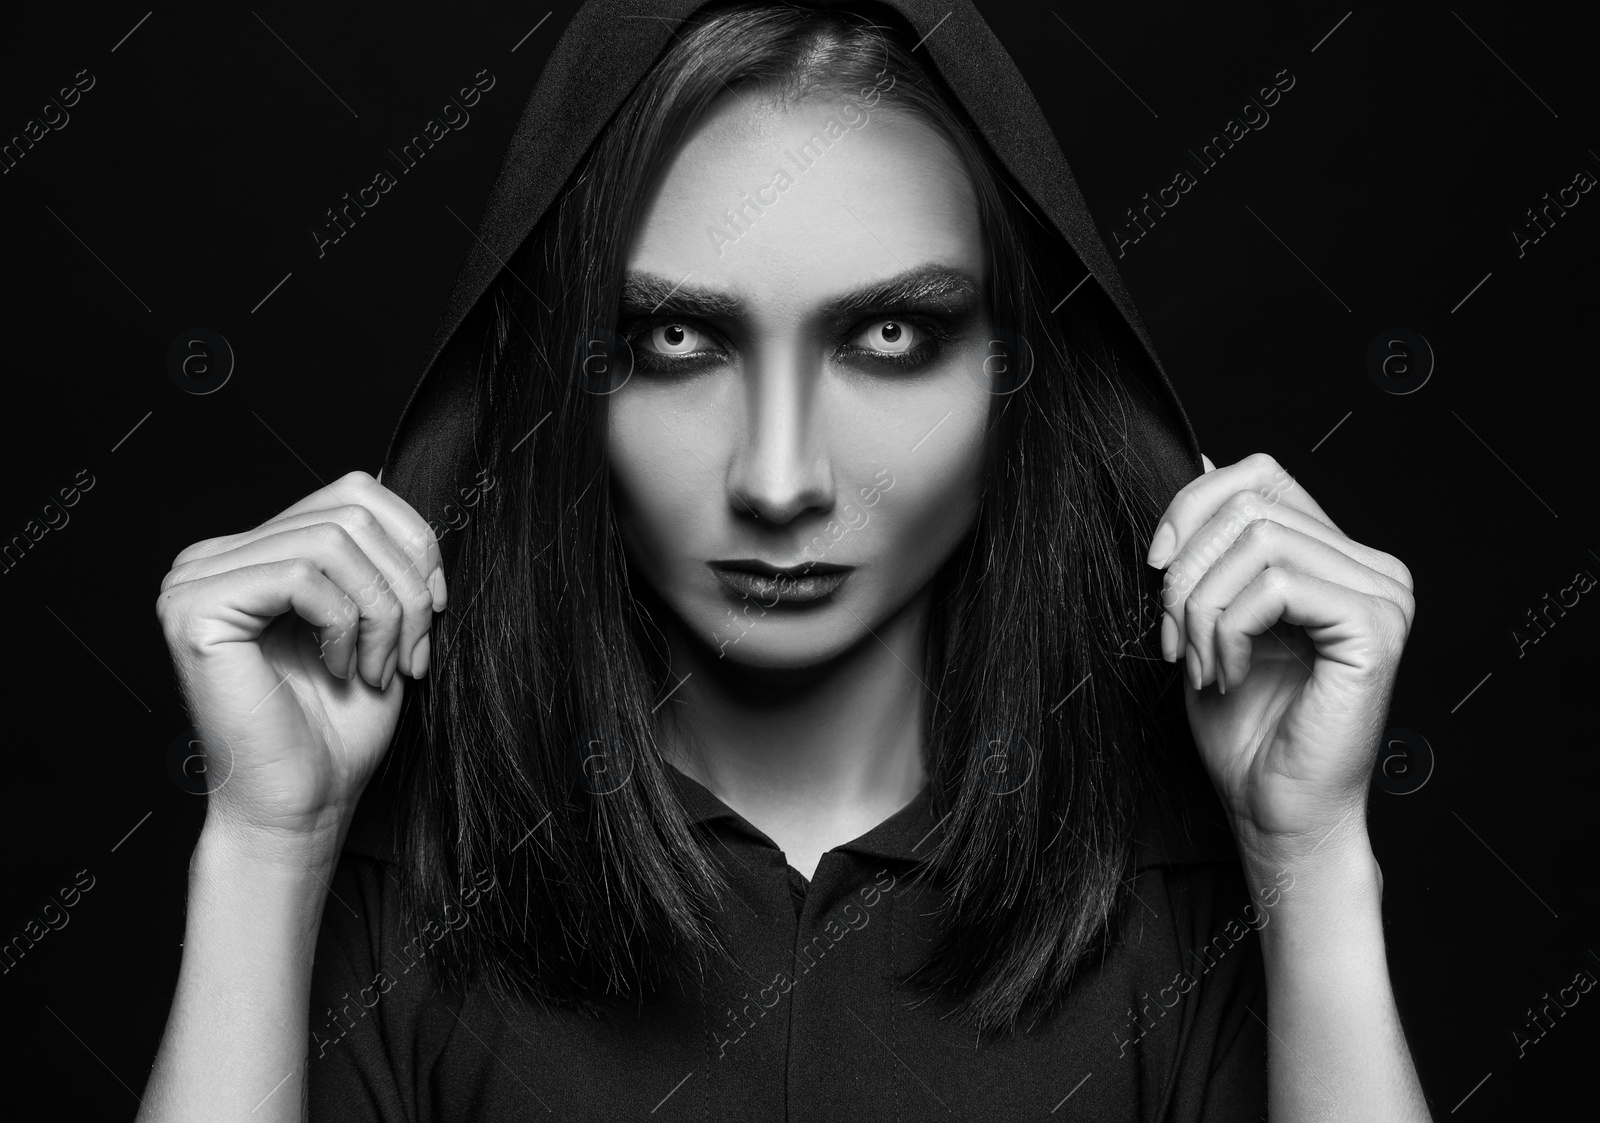 Photo of Mysterious witch with spooky eyes on dark background. Black and white effect